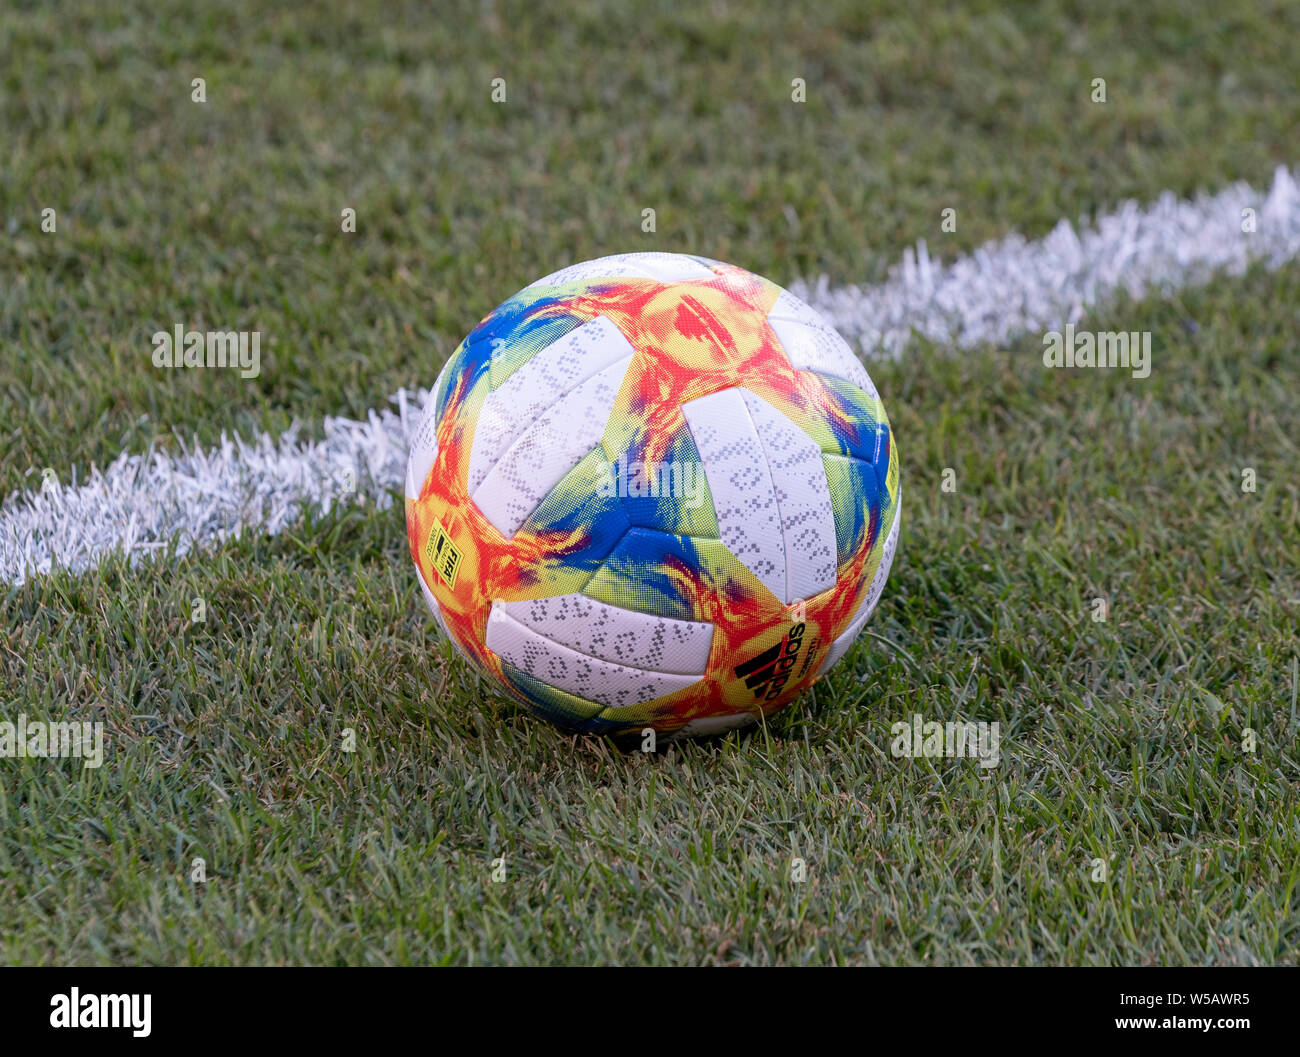 East Rutherford, NJ - July 26, 2019: Official Adidas FIFA ball used for  Real Madrid game against Atletico Madrid as part of ICC tournament at  Metlife stadium Atletico won 7 - 3 Stock Photo - Alamy